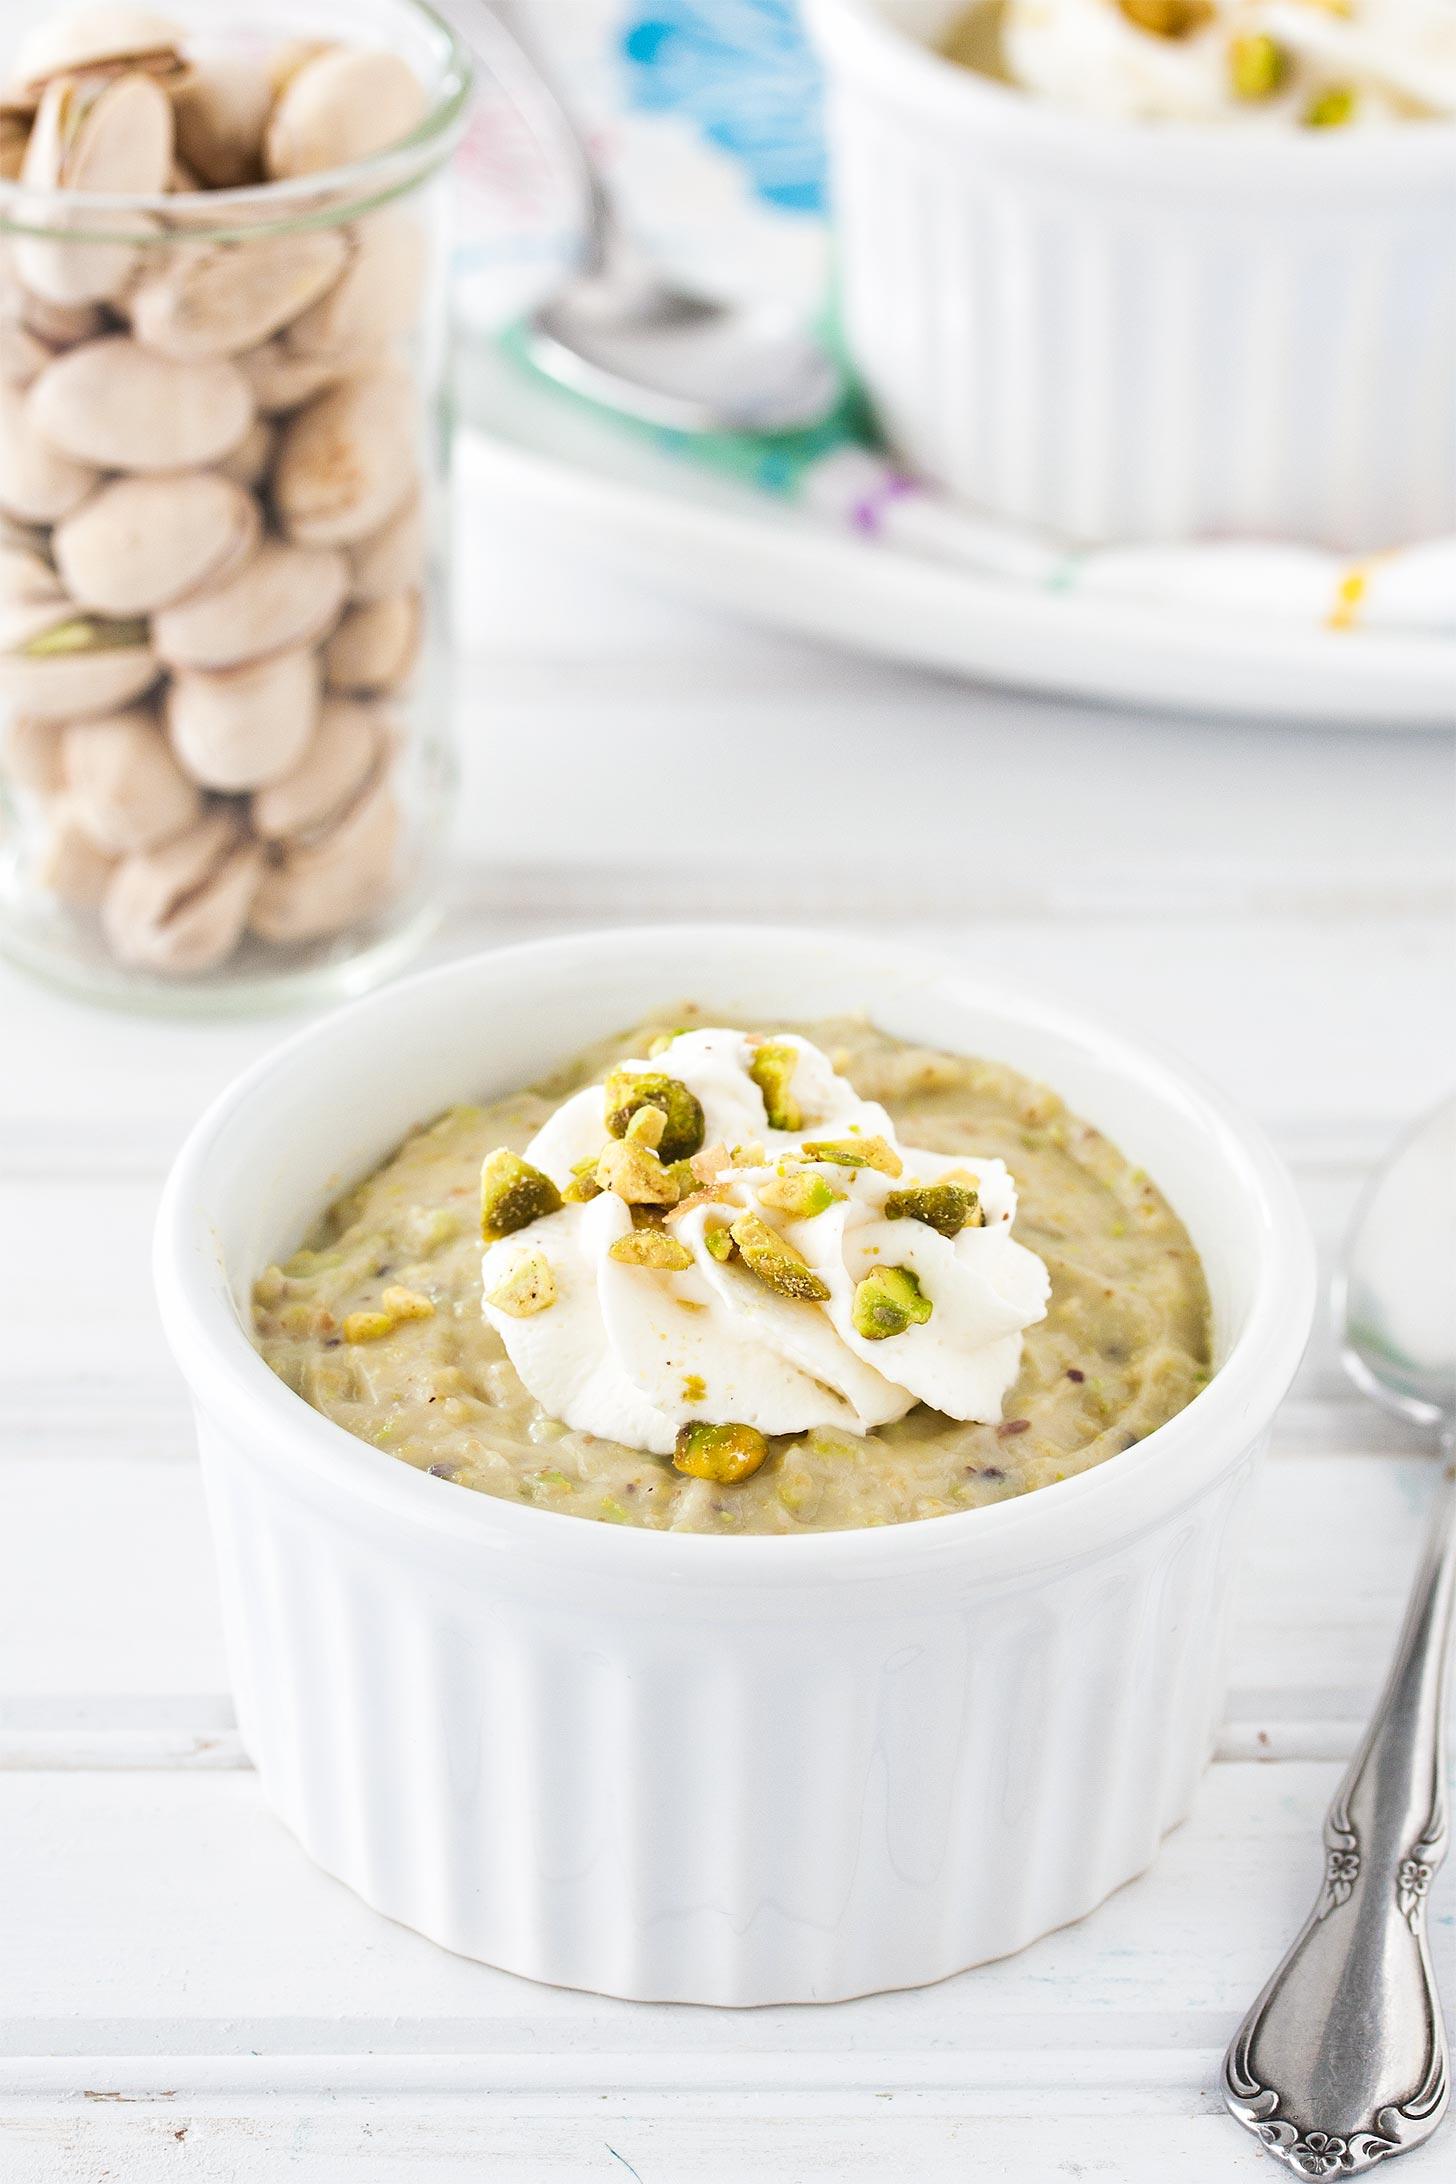 Homemade pistachio pudding in a white ramekin with spoon